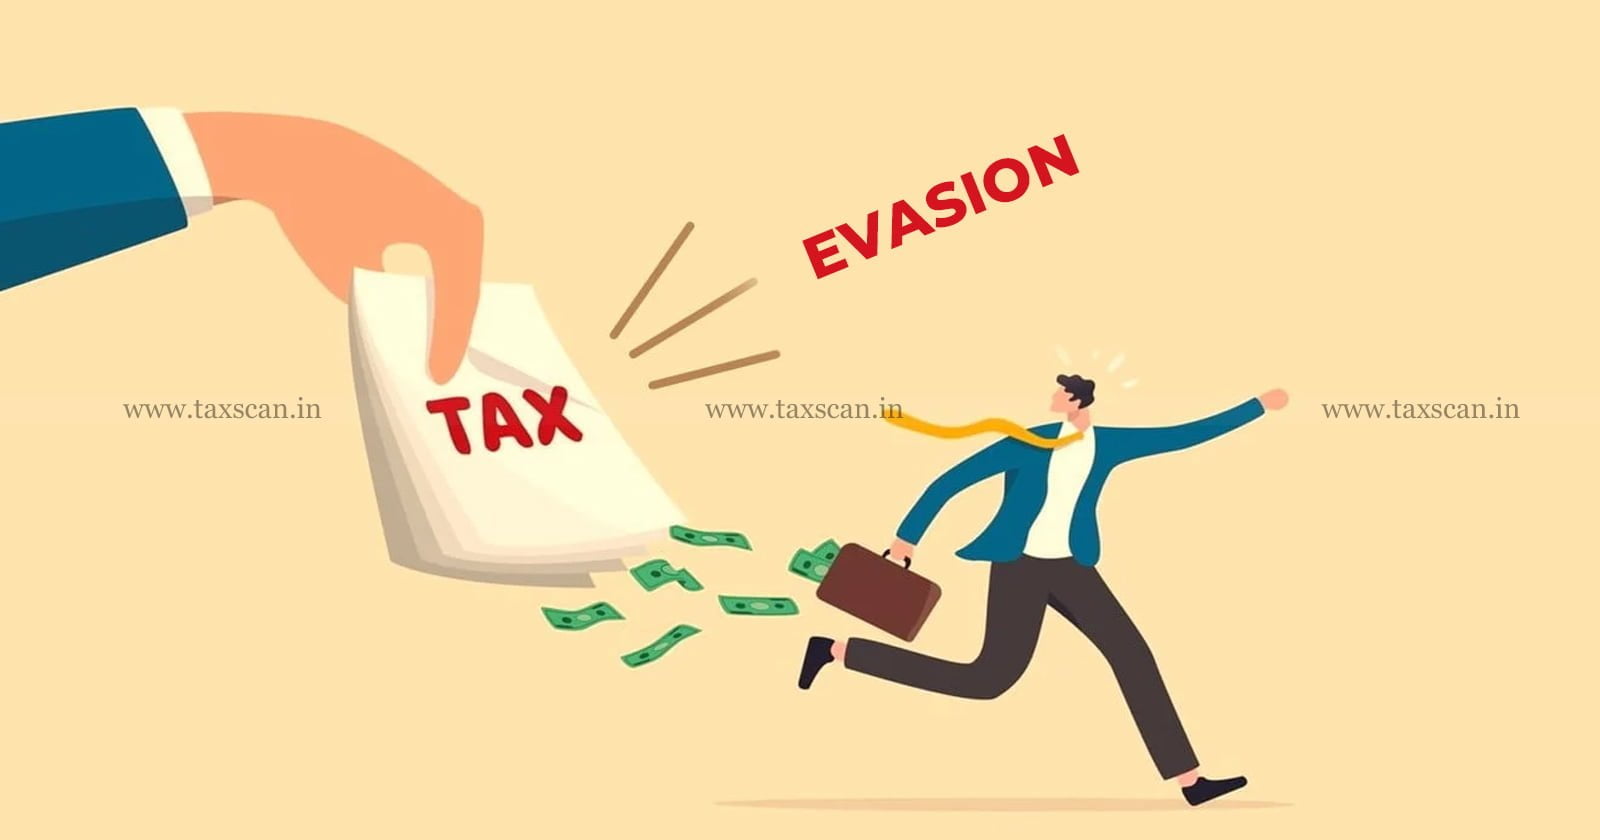 Kanpur Security Service Agency - Service Tax Evasion - Service Tax - Tax news - taxscan